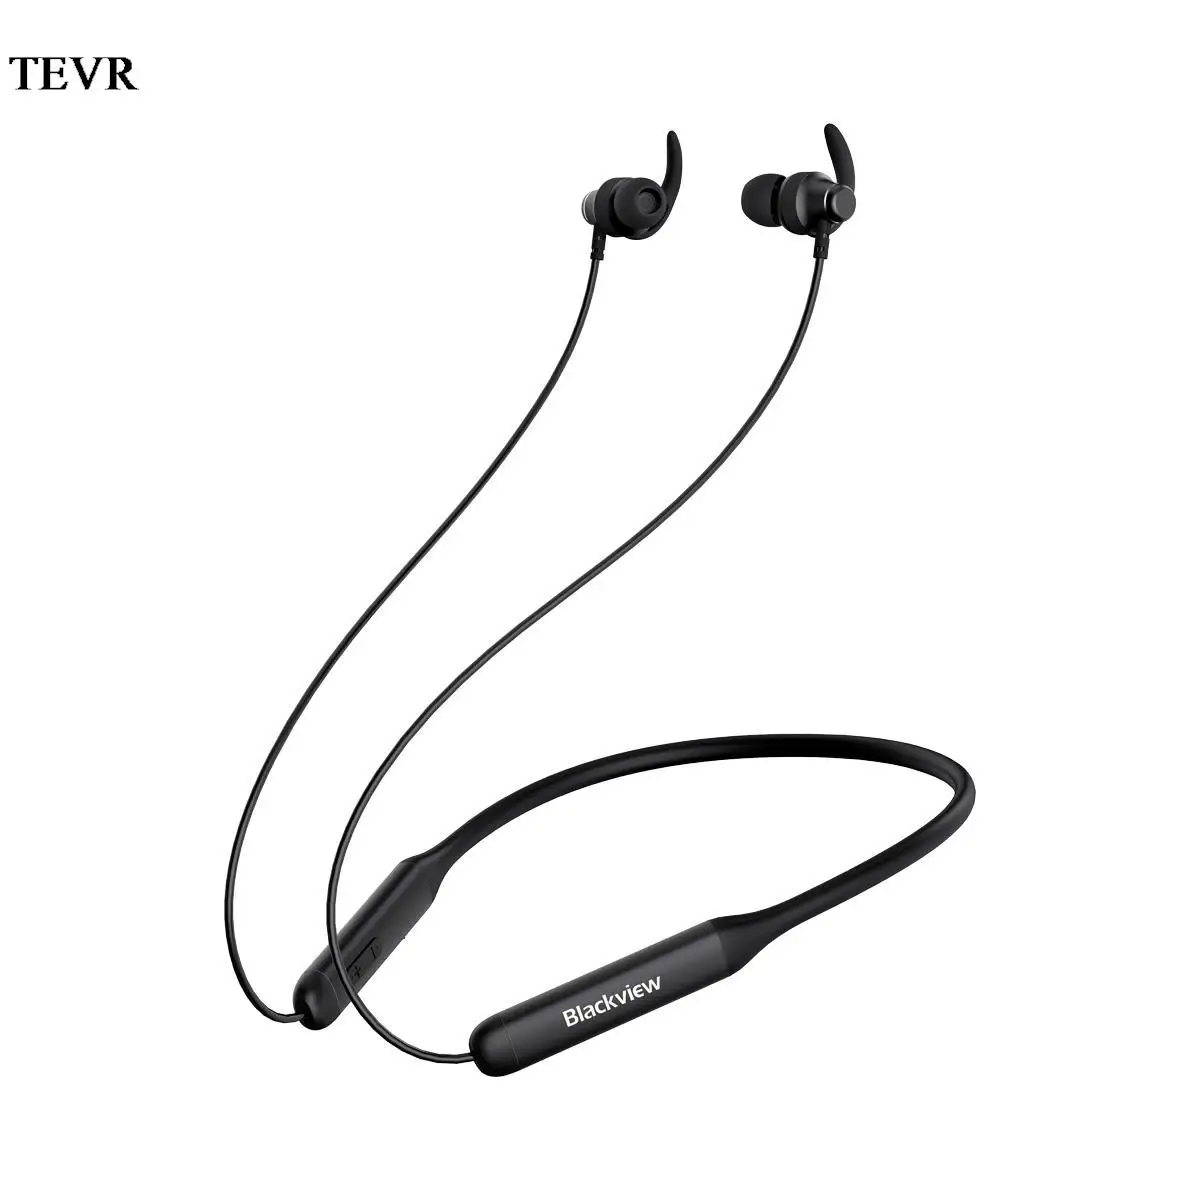 

Blackview Fitbuds 1 Bluetooth Earphones Wireless Sport Earbuds with Mic IPX7 Waterproof cVc 8.0 Noise Reduction For Xiaomi etc